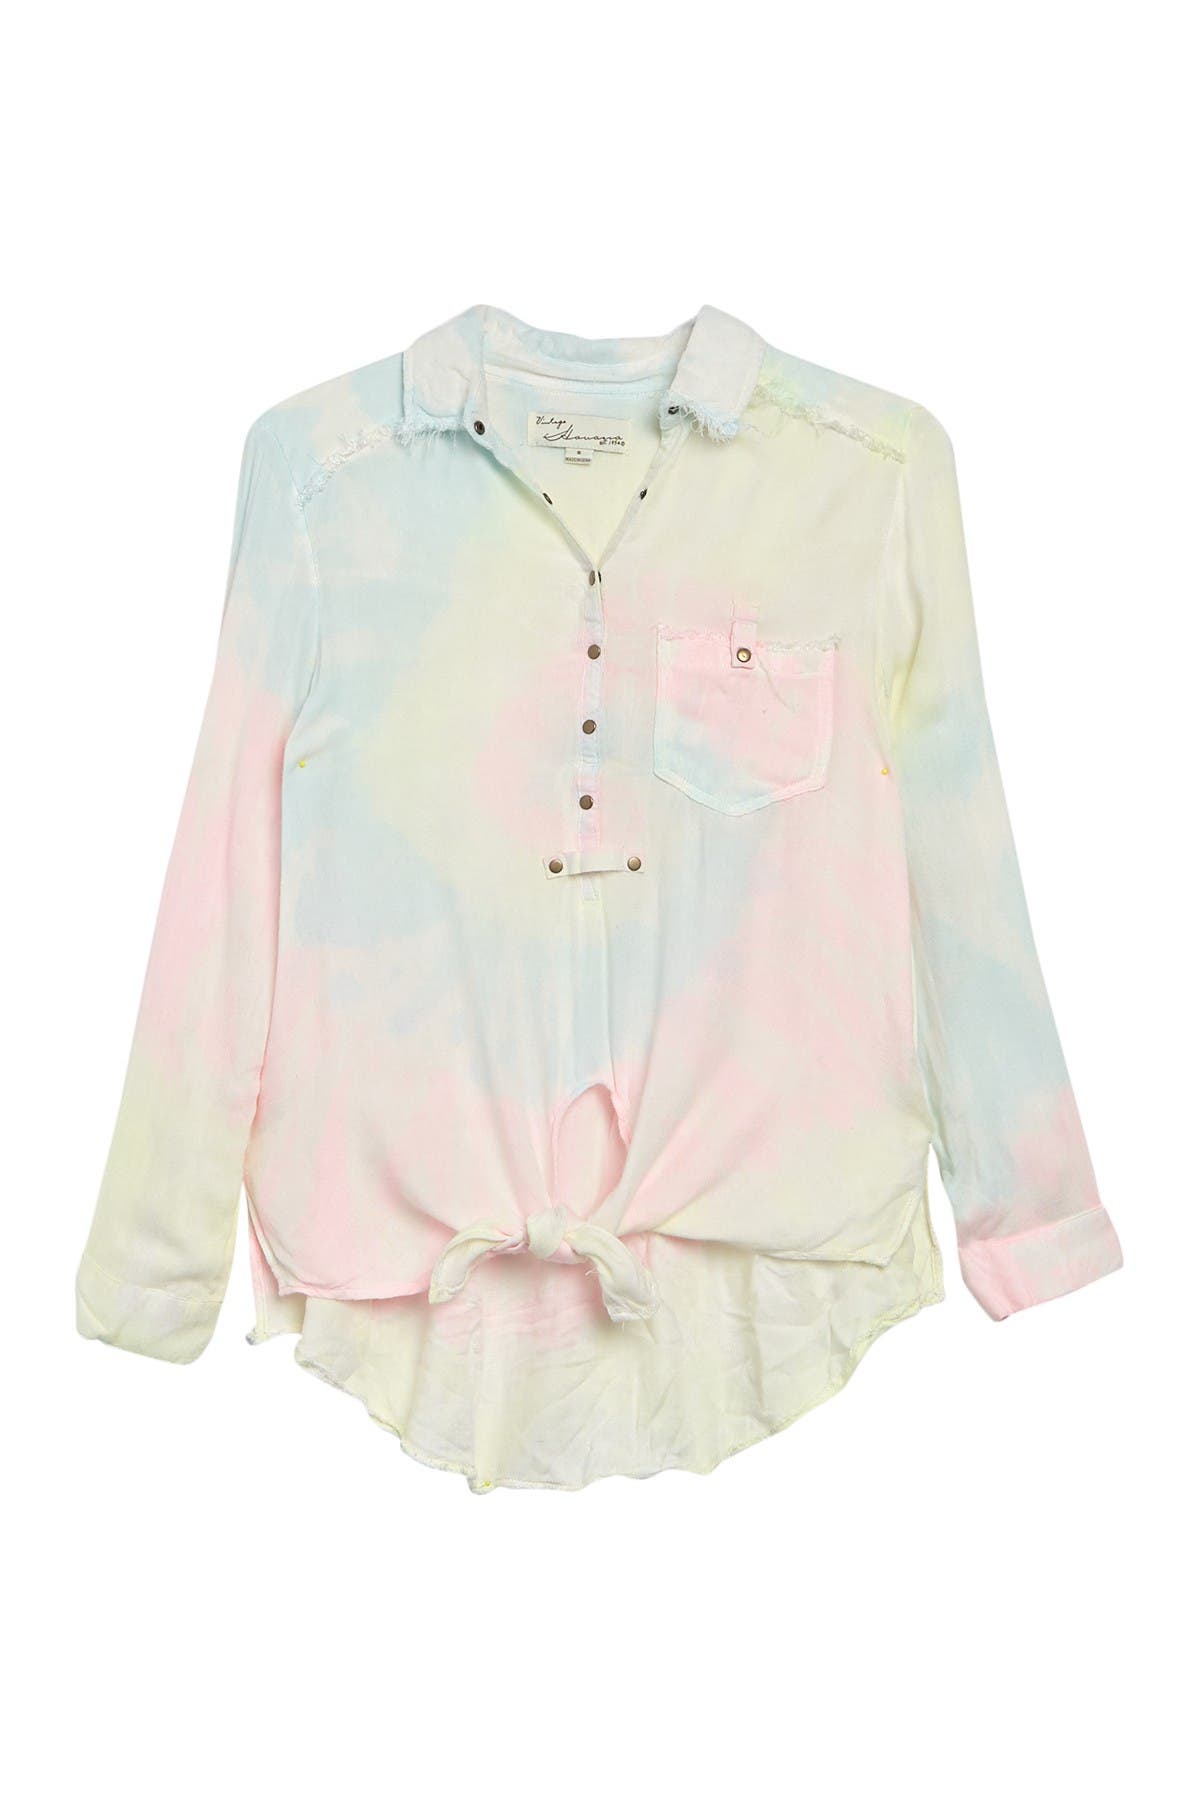 high low button down blouse